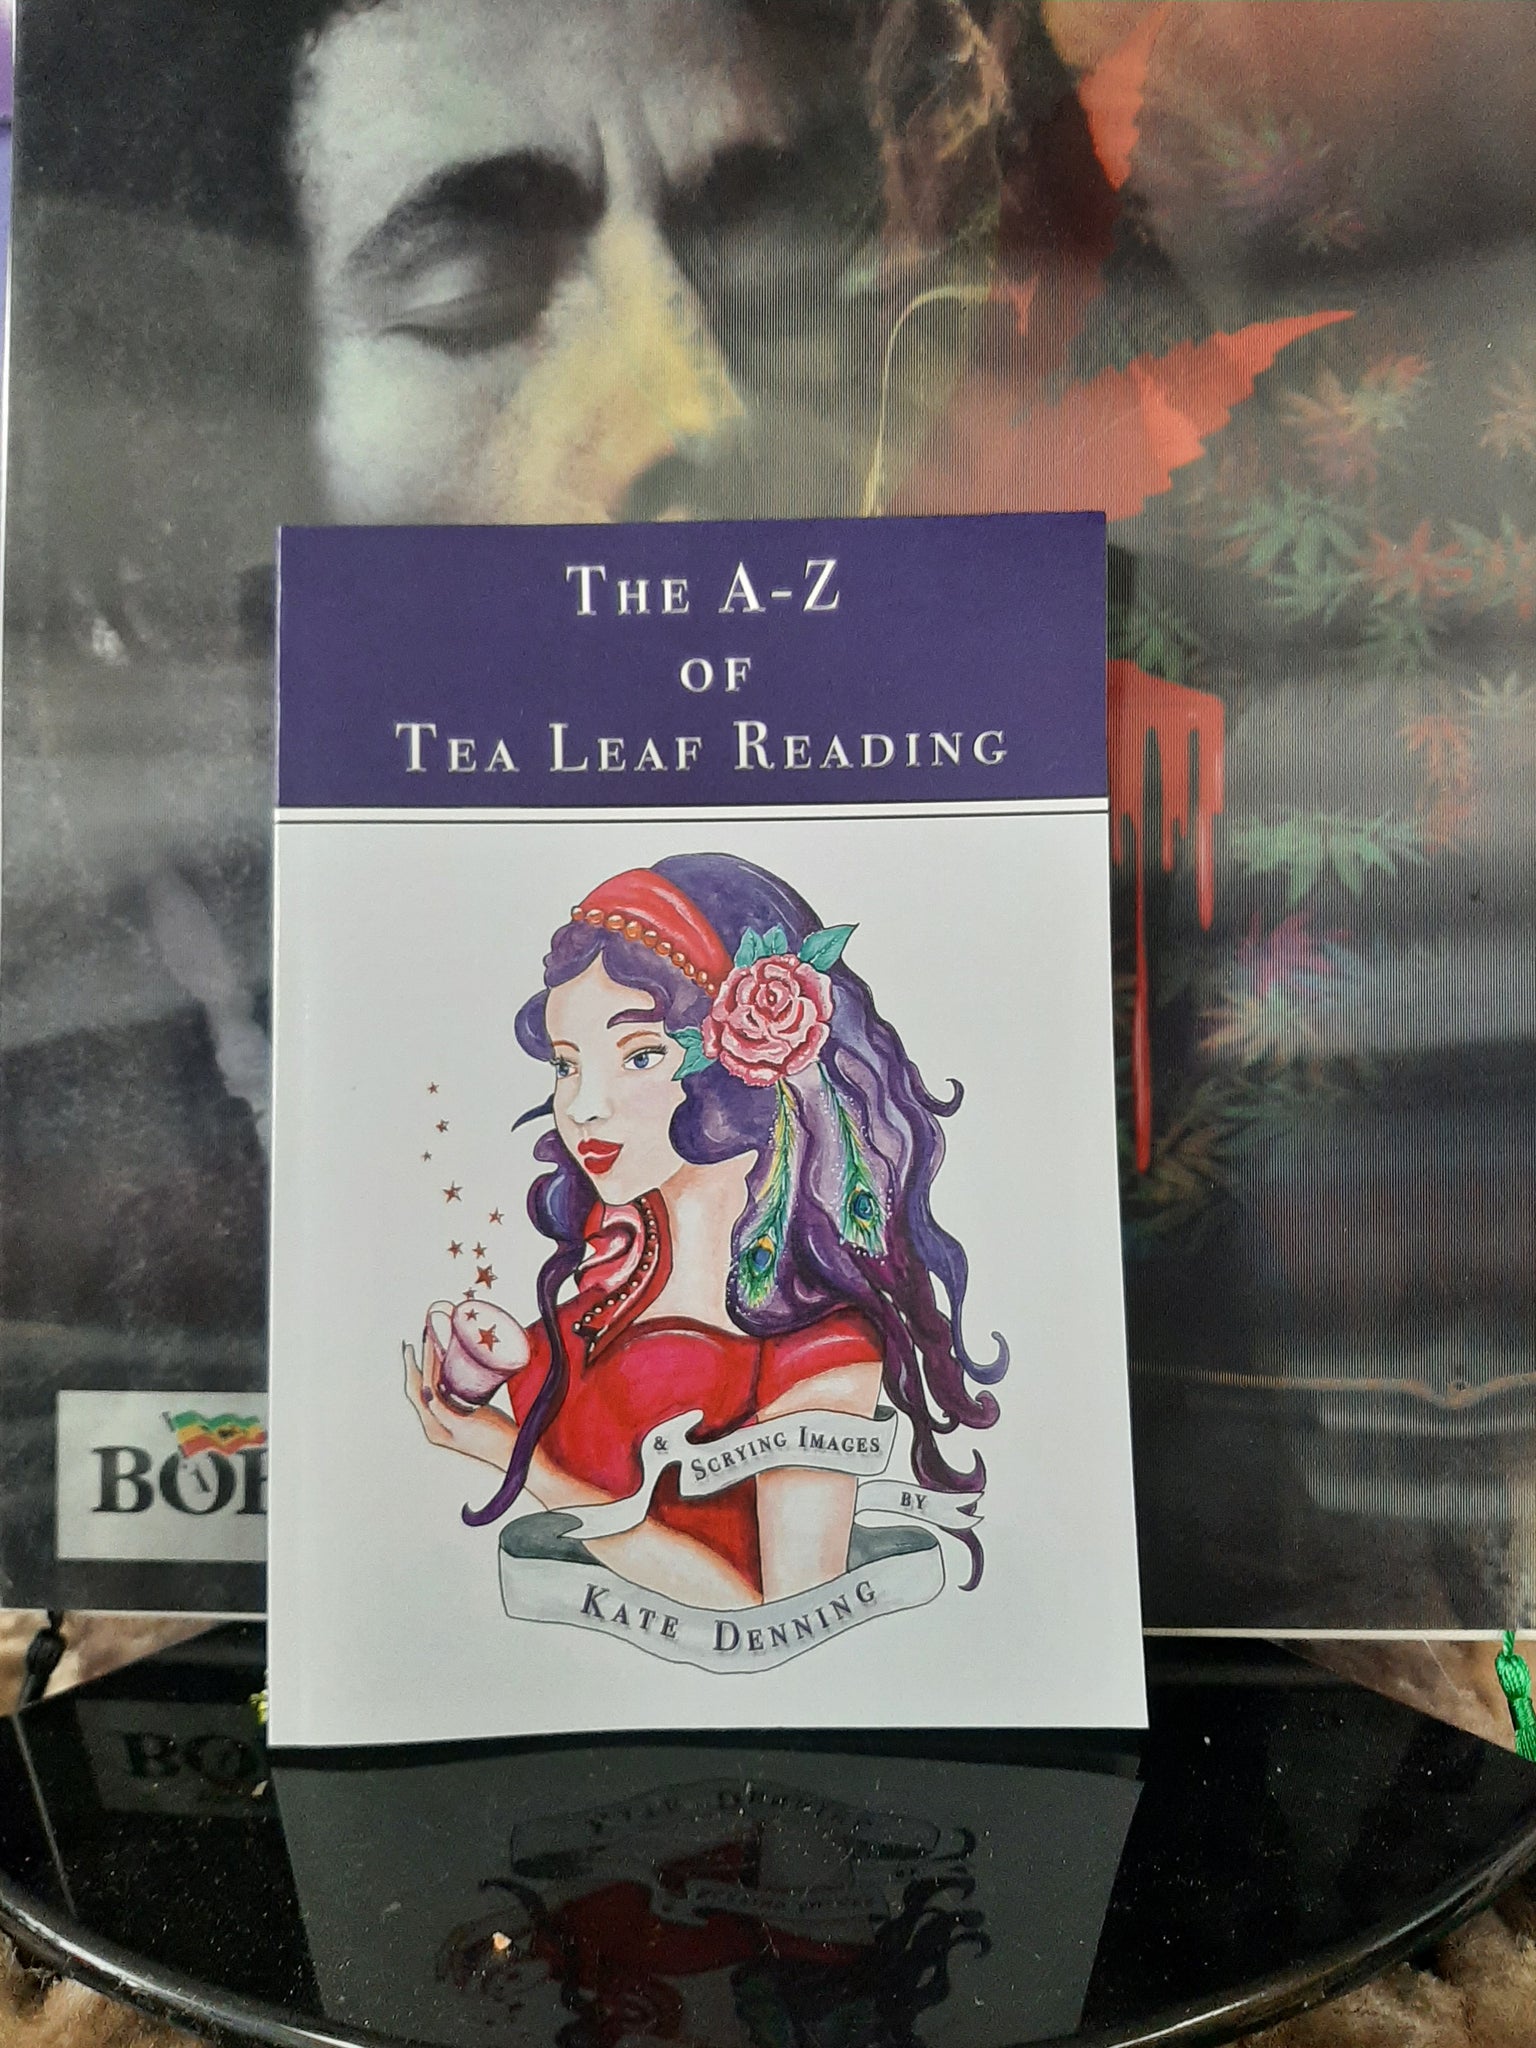 The A-Z of Tea Leaf Reading